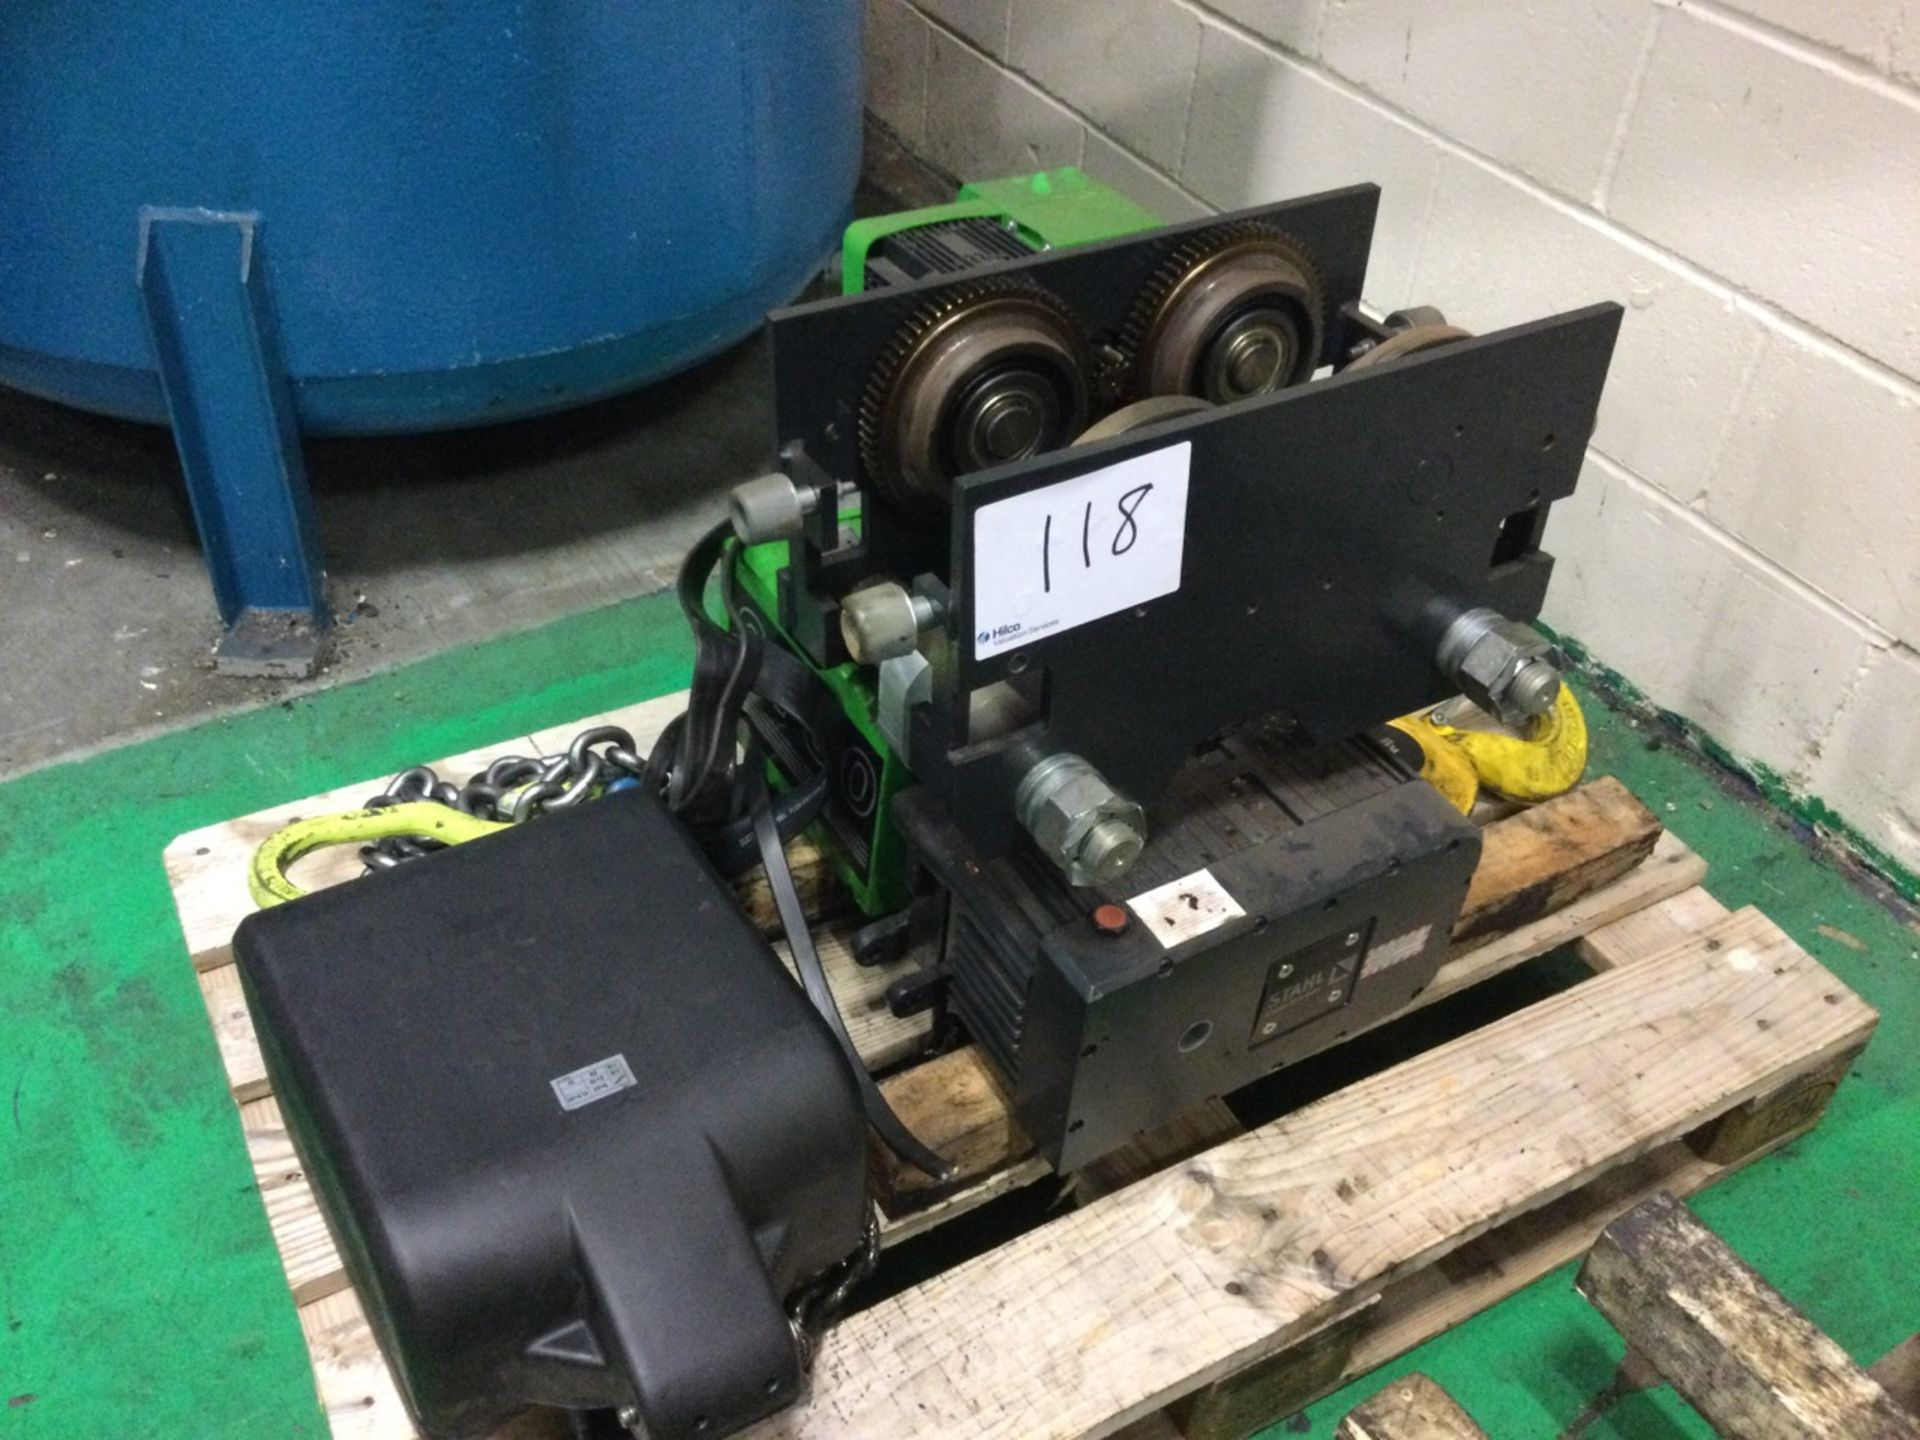 1 Stahl, ST50, Electric Chain Hoist, 5 Tonne Rated Capacity(Removed From Overhead Crane And On A Pa